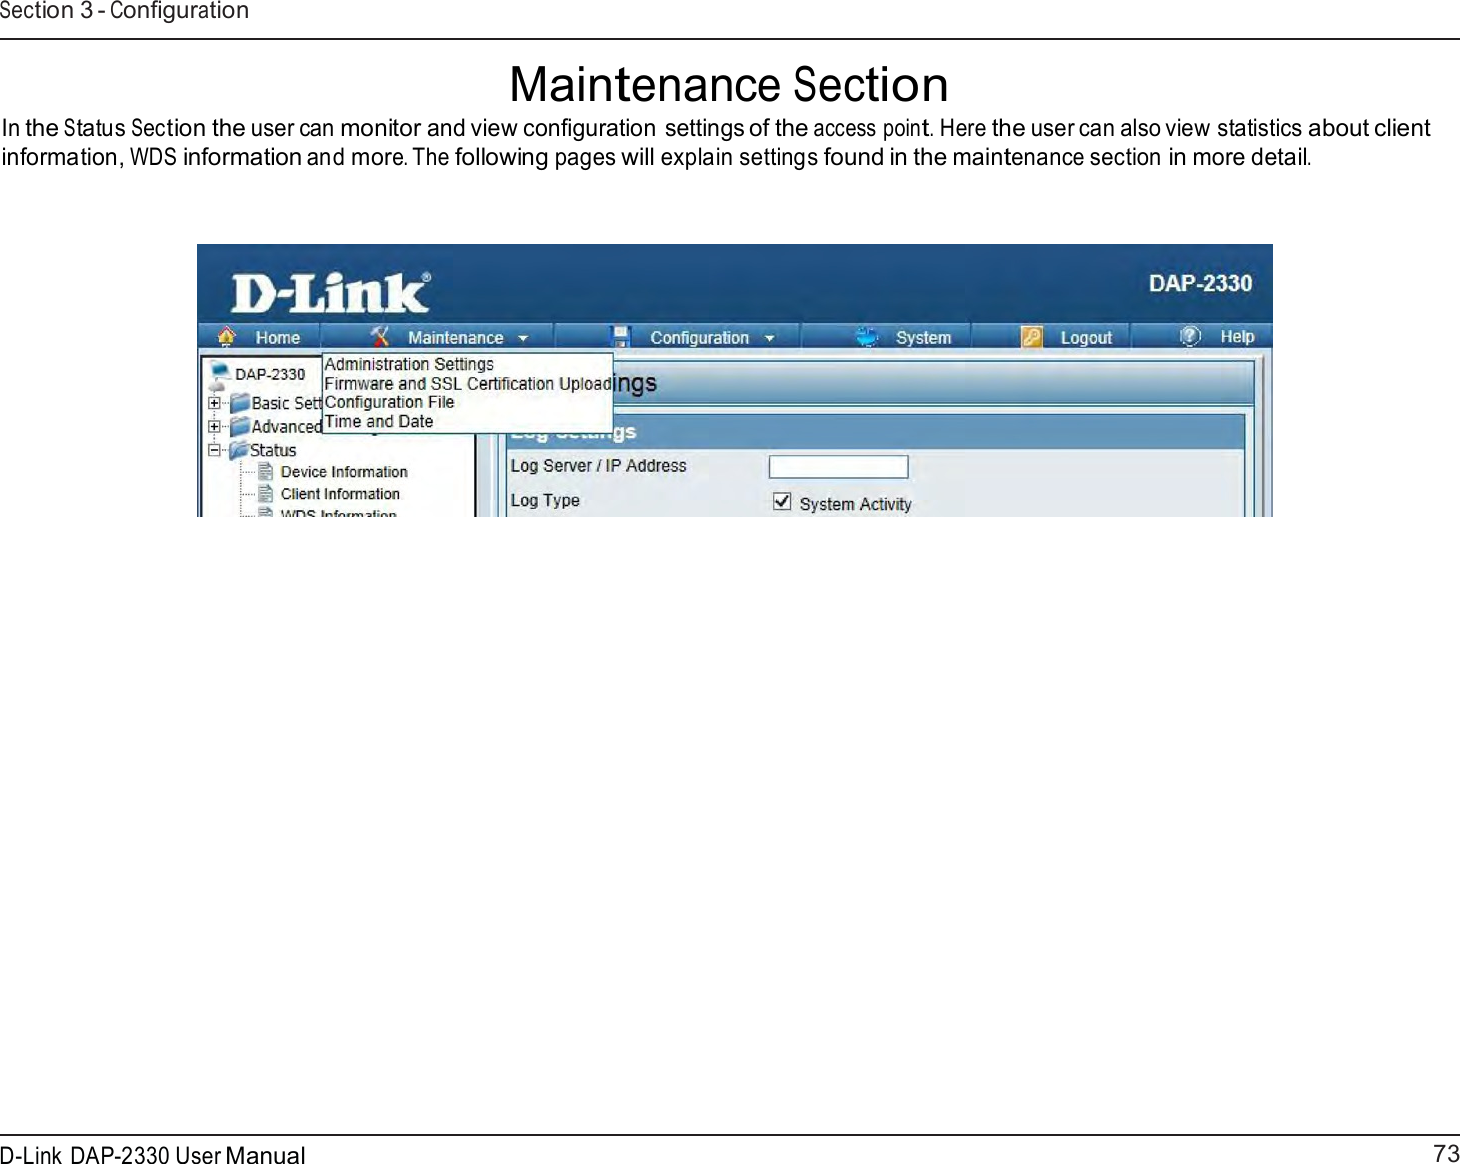 73 D-Link DAP-2330 User ManualSection 3 - Configuration    Maintenance Section In the Status Section the user can monitor and view configuration settings of the access point. Here the user can also view statistics about client information, WDS information and more. The following pages will explain settings found in the maintenance section in more detail.      